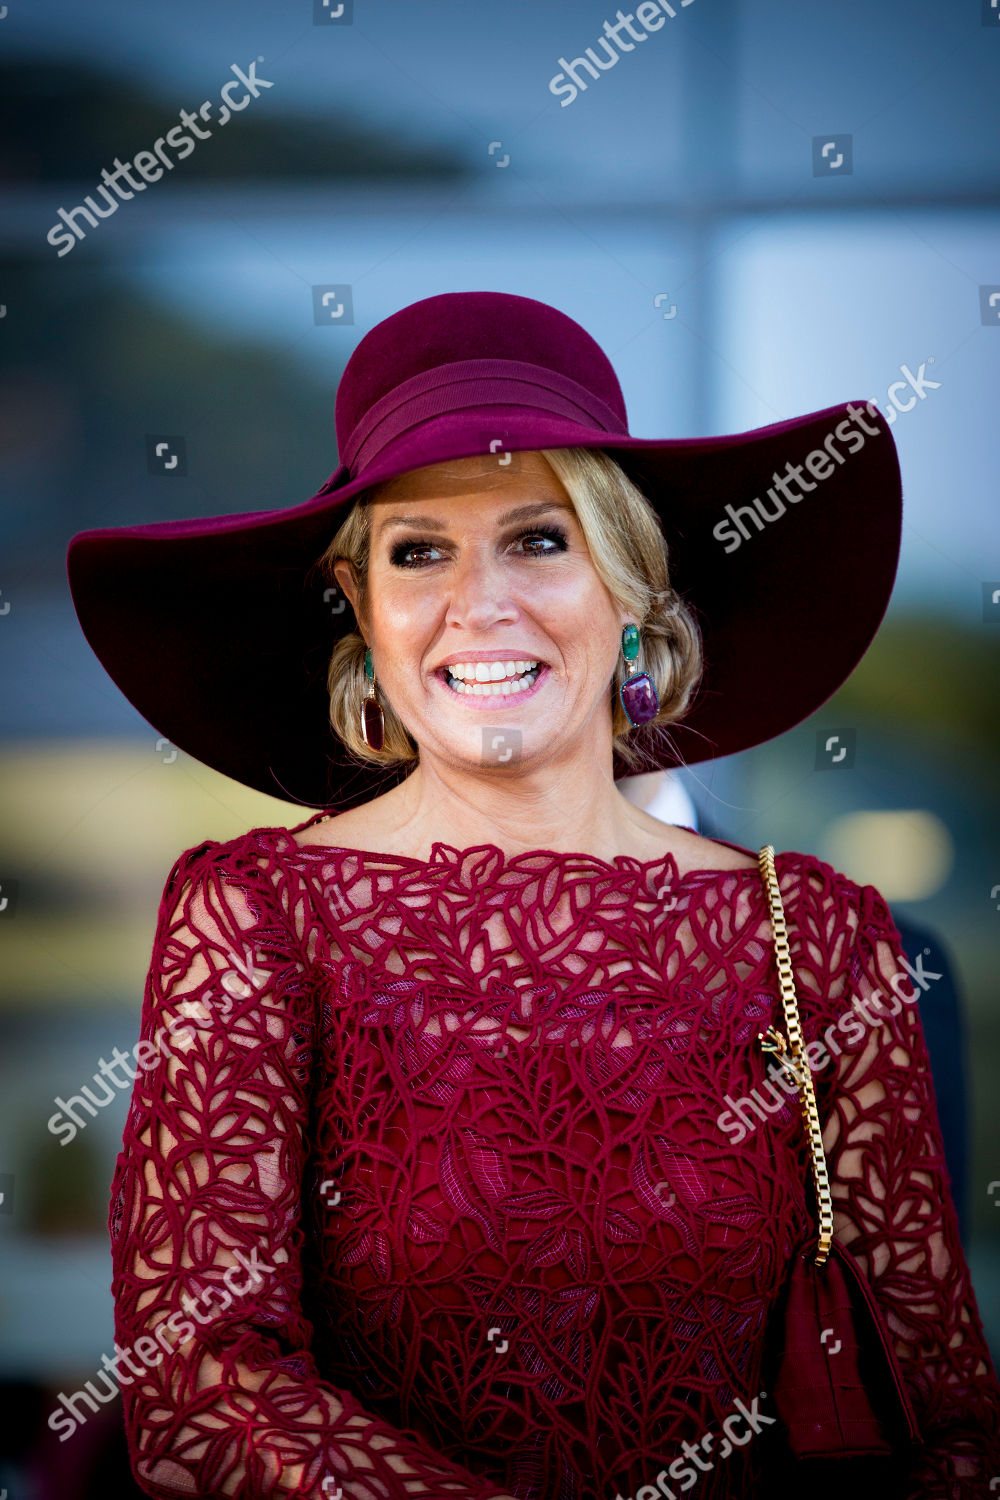 king-willem-alexander-and-queen-maxima-visit-to-germany-shutterstock-editorial-9928529k.jpg